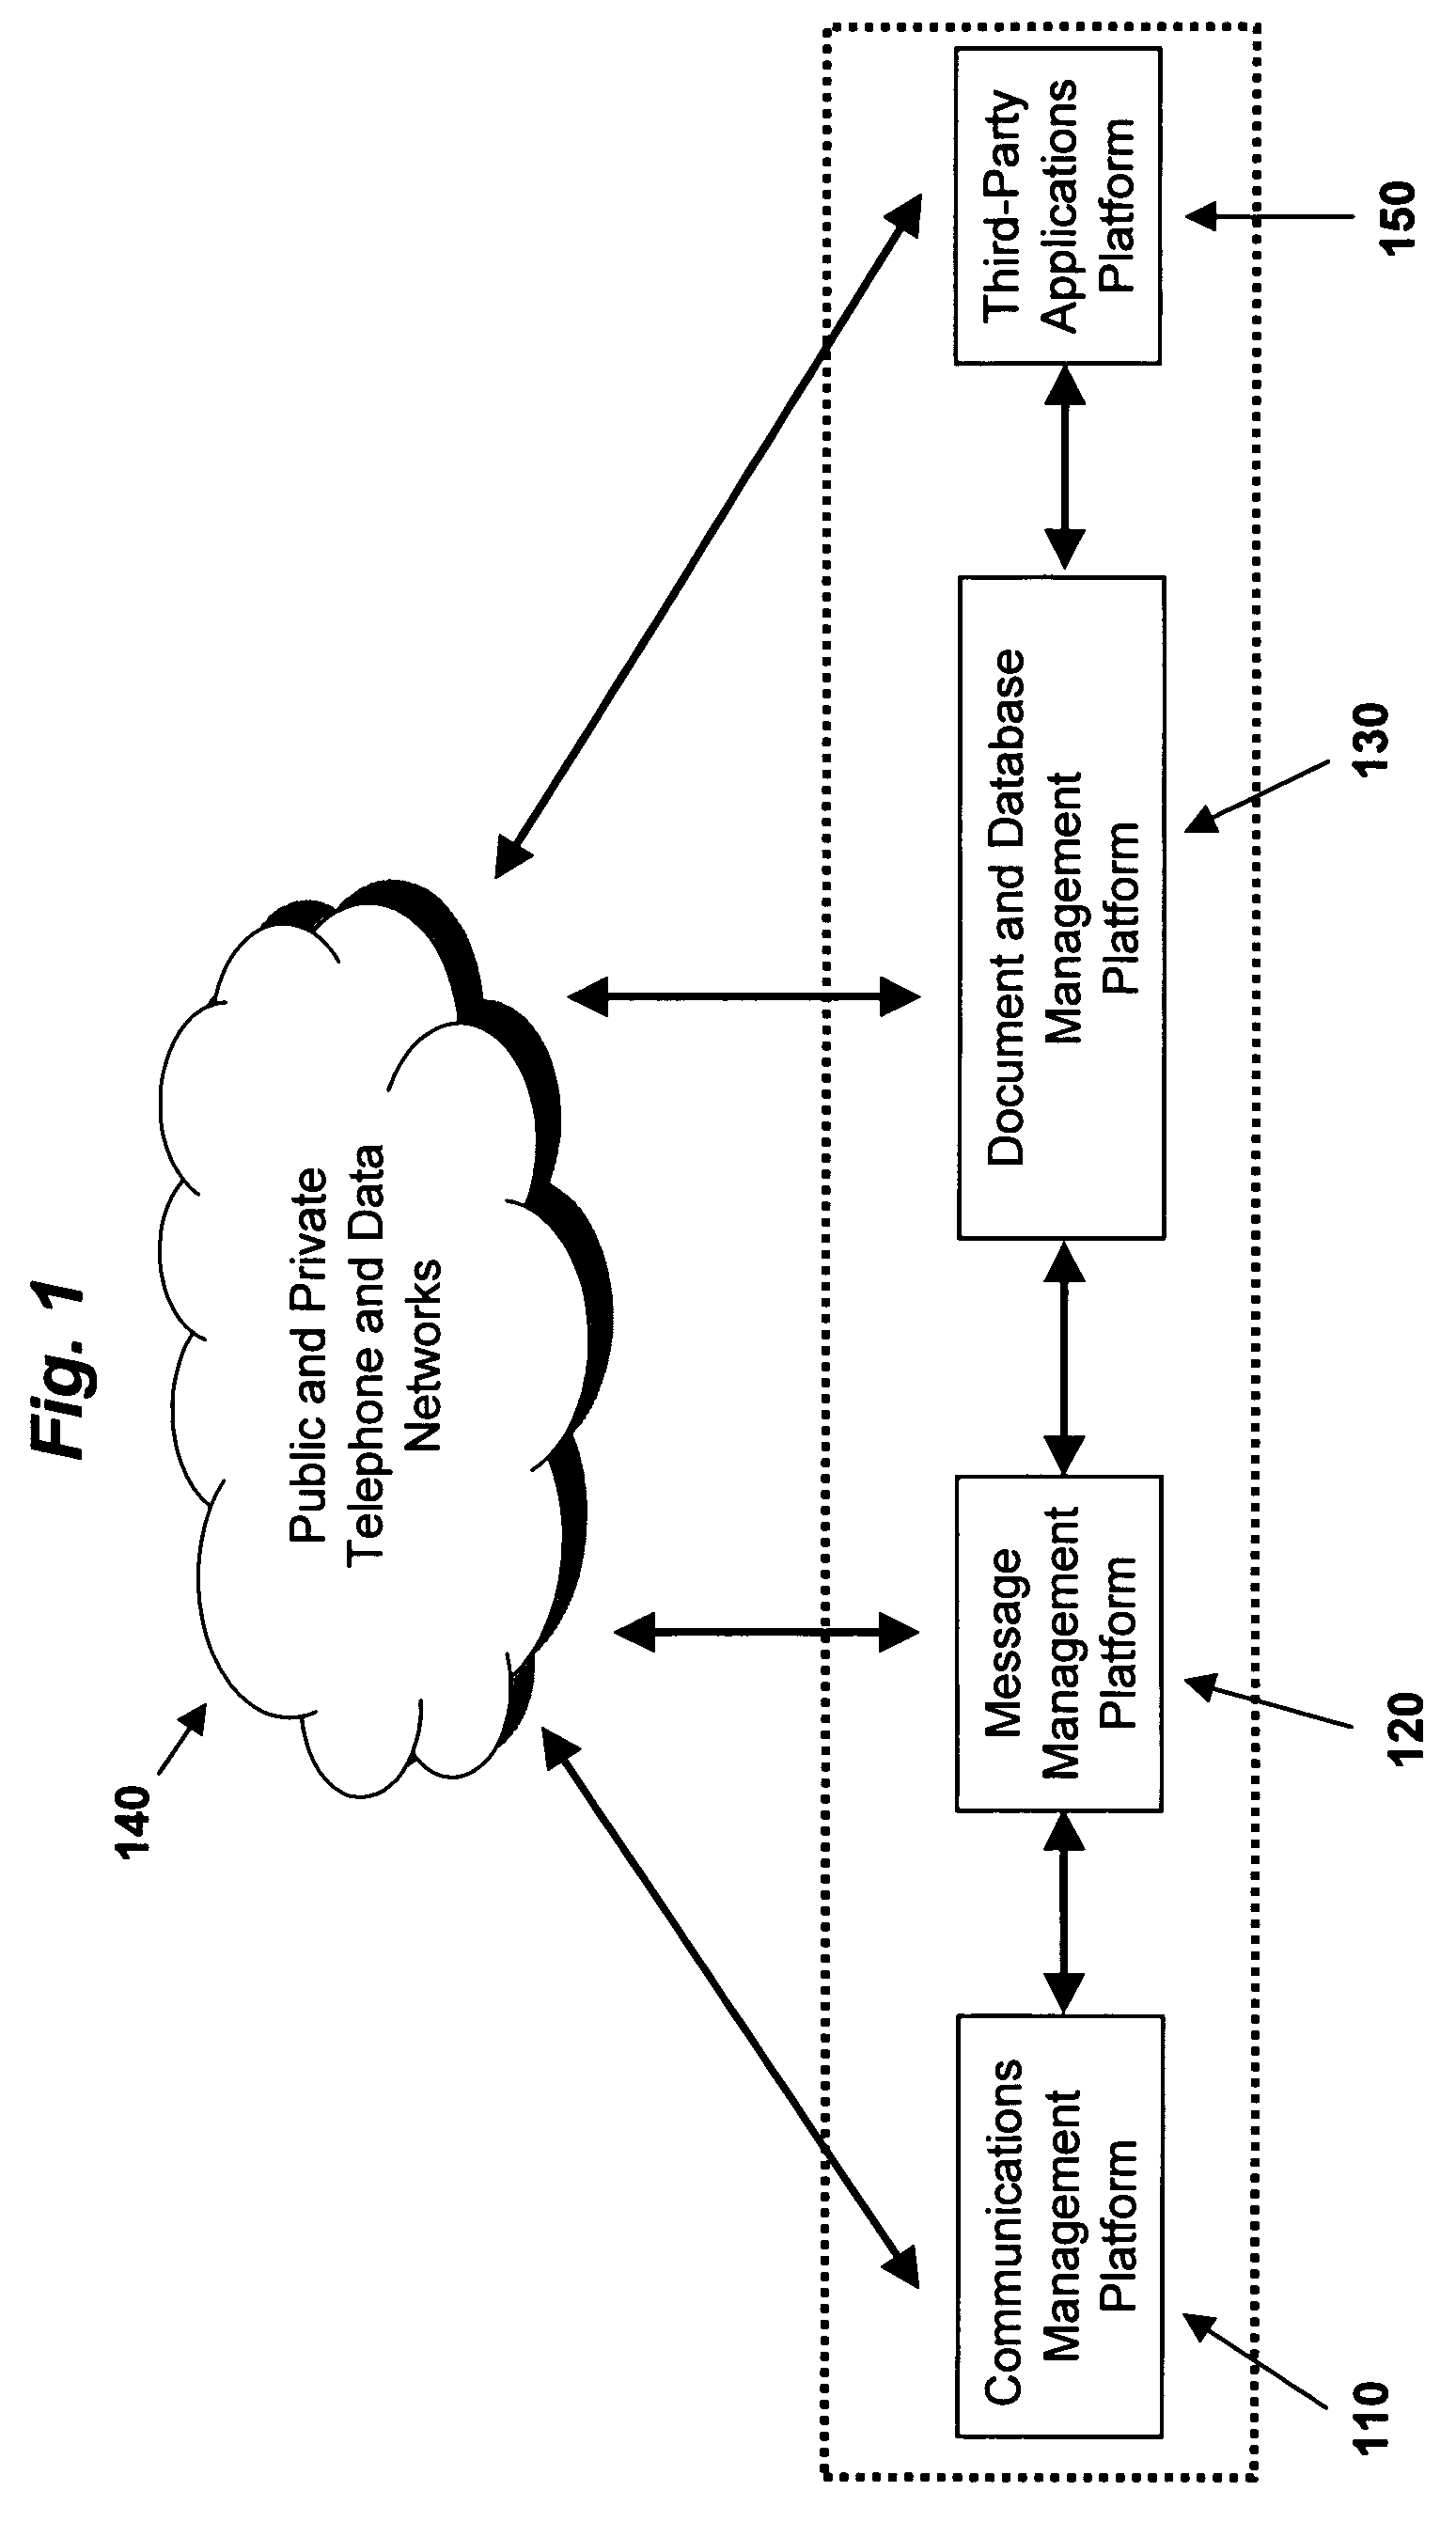 System and method for multi-tiered rule filtering